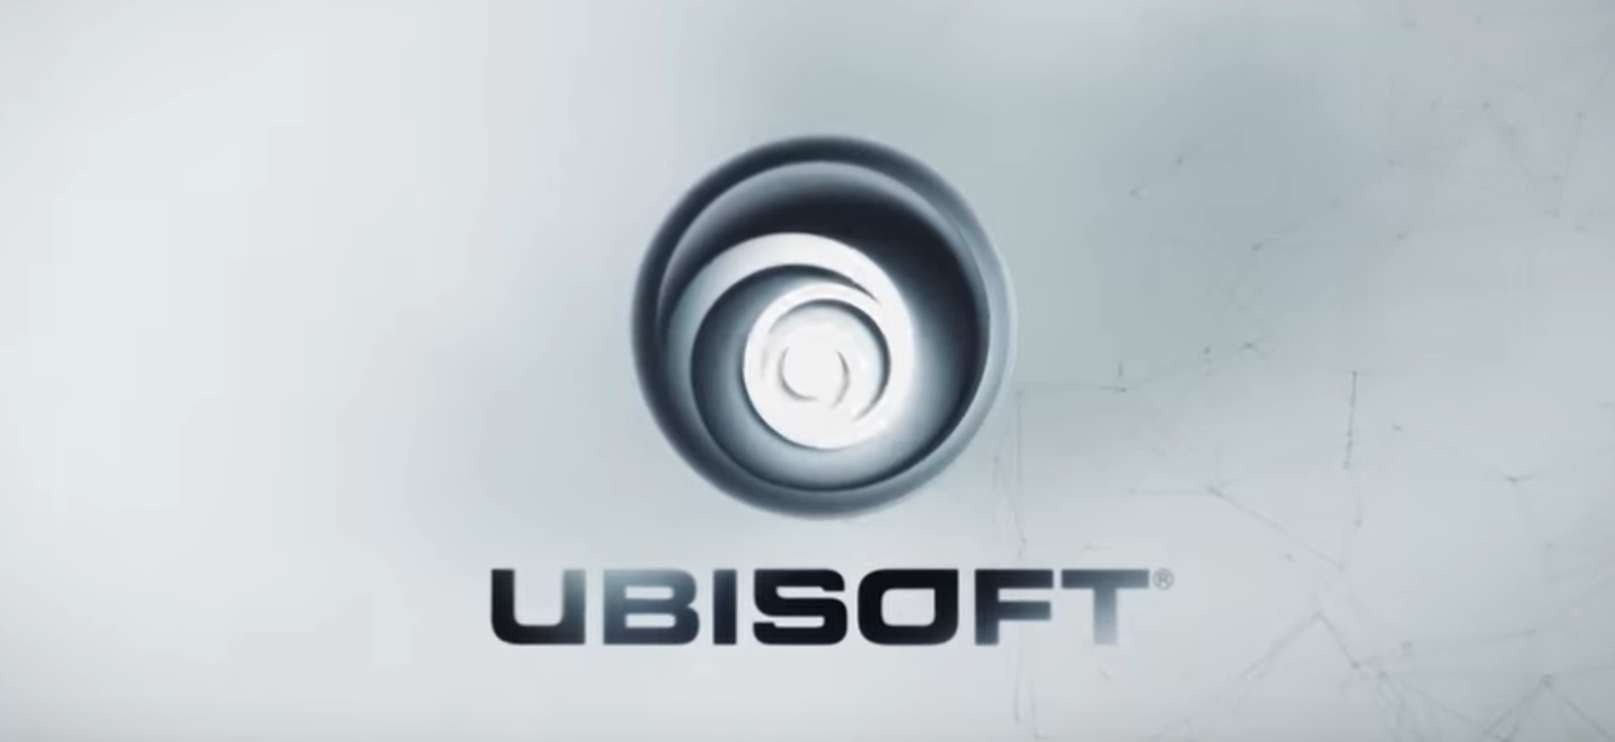 Ubisoft Addresses Toxic Work Culture, Promising Company Changes To Help Promote A Healthier Workplace